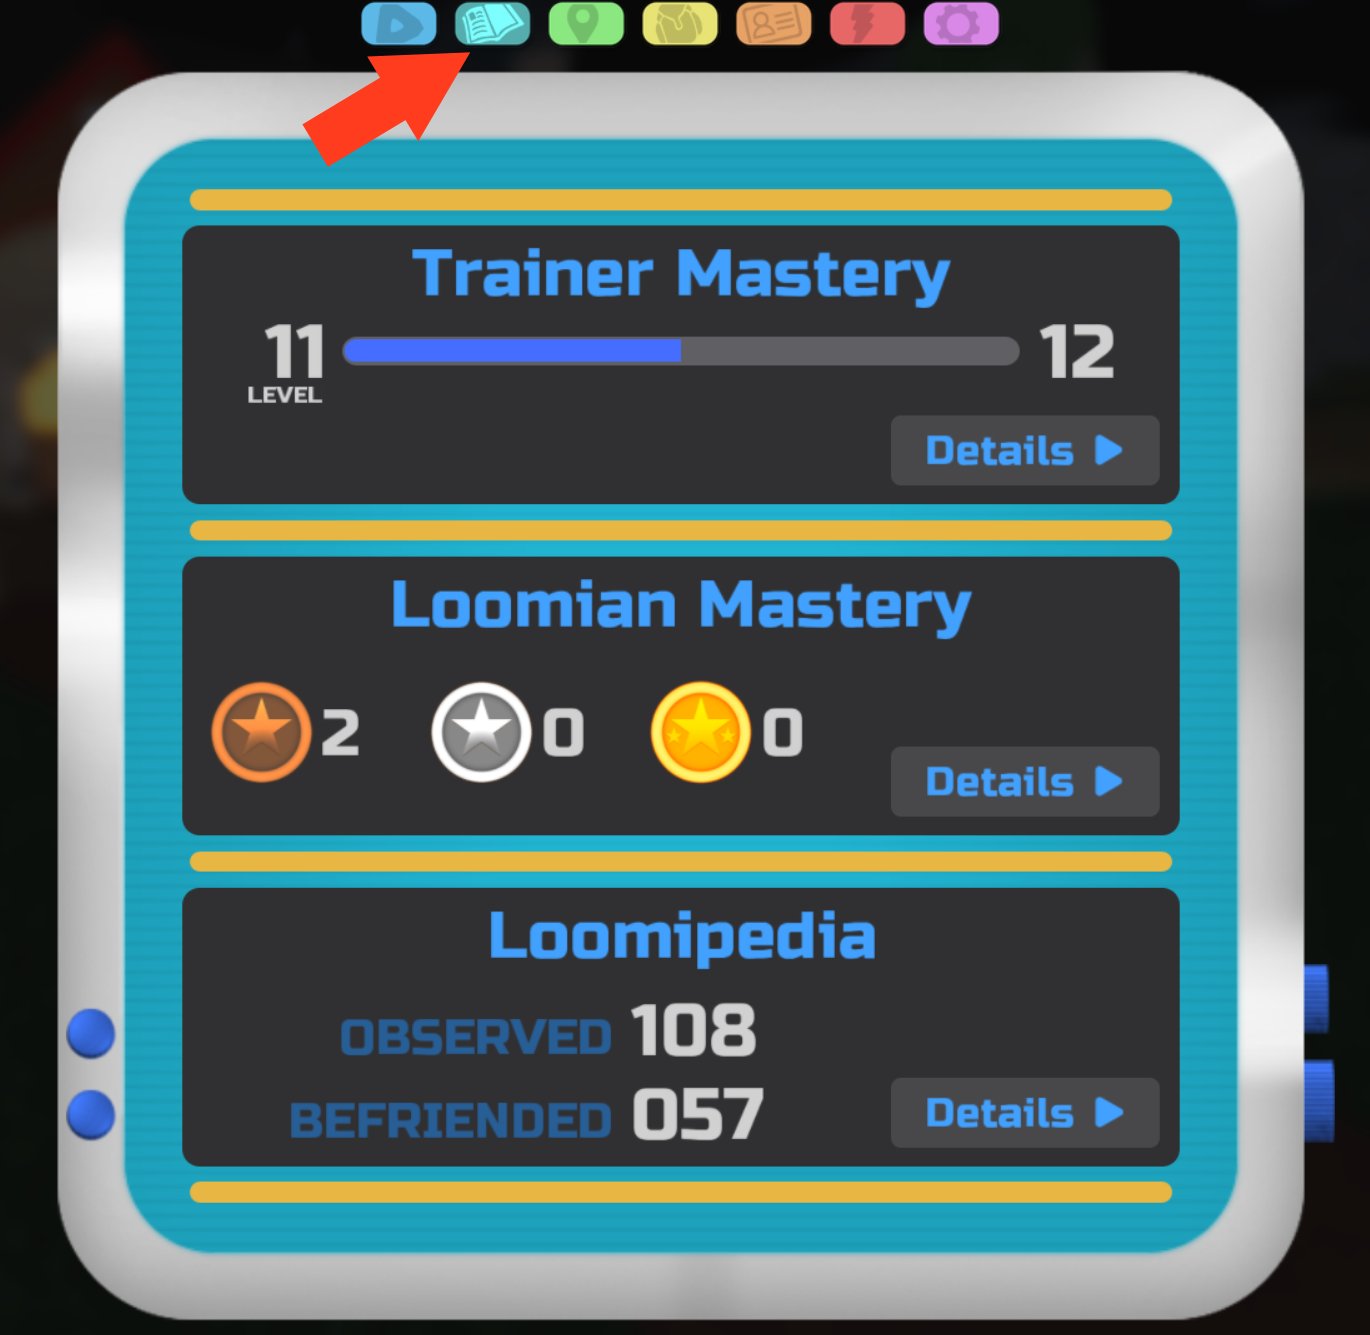 Llama Train Studio On Twitter Today In This Update To Loomian Legacy We Finally Introduce The New Loomian Mastery System That You Can Access By Opening The Mastery Tab Where The Loomipedia - roblox llama train studio twitter